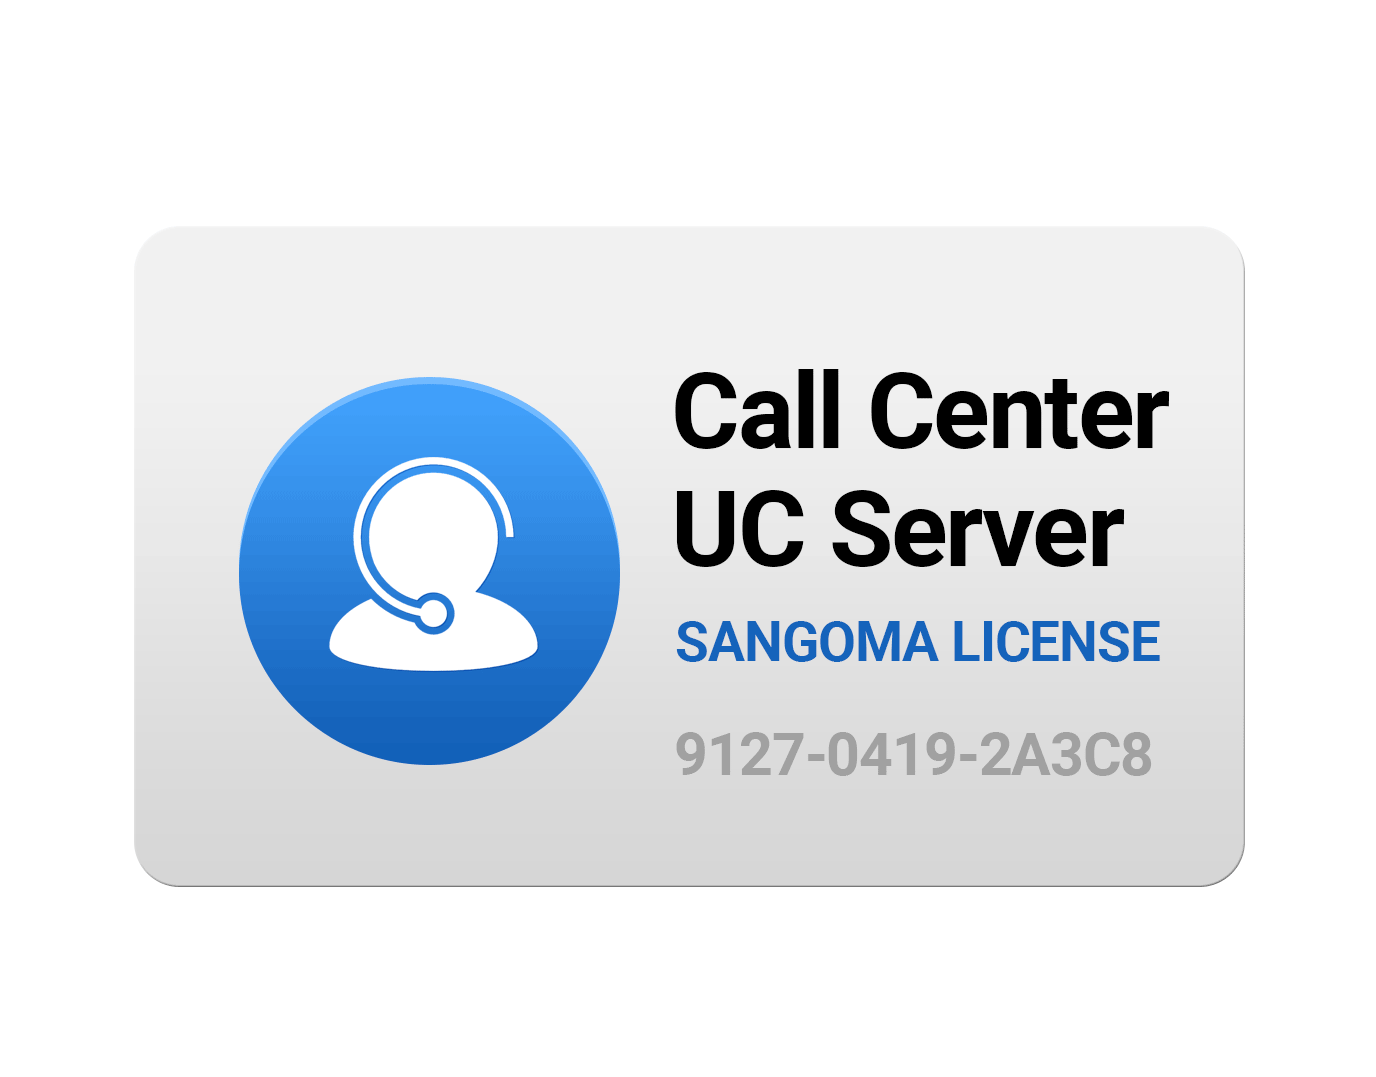 Call Center Features License for UC SER